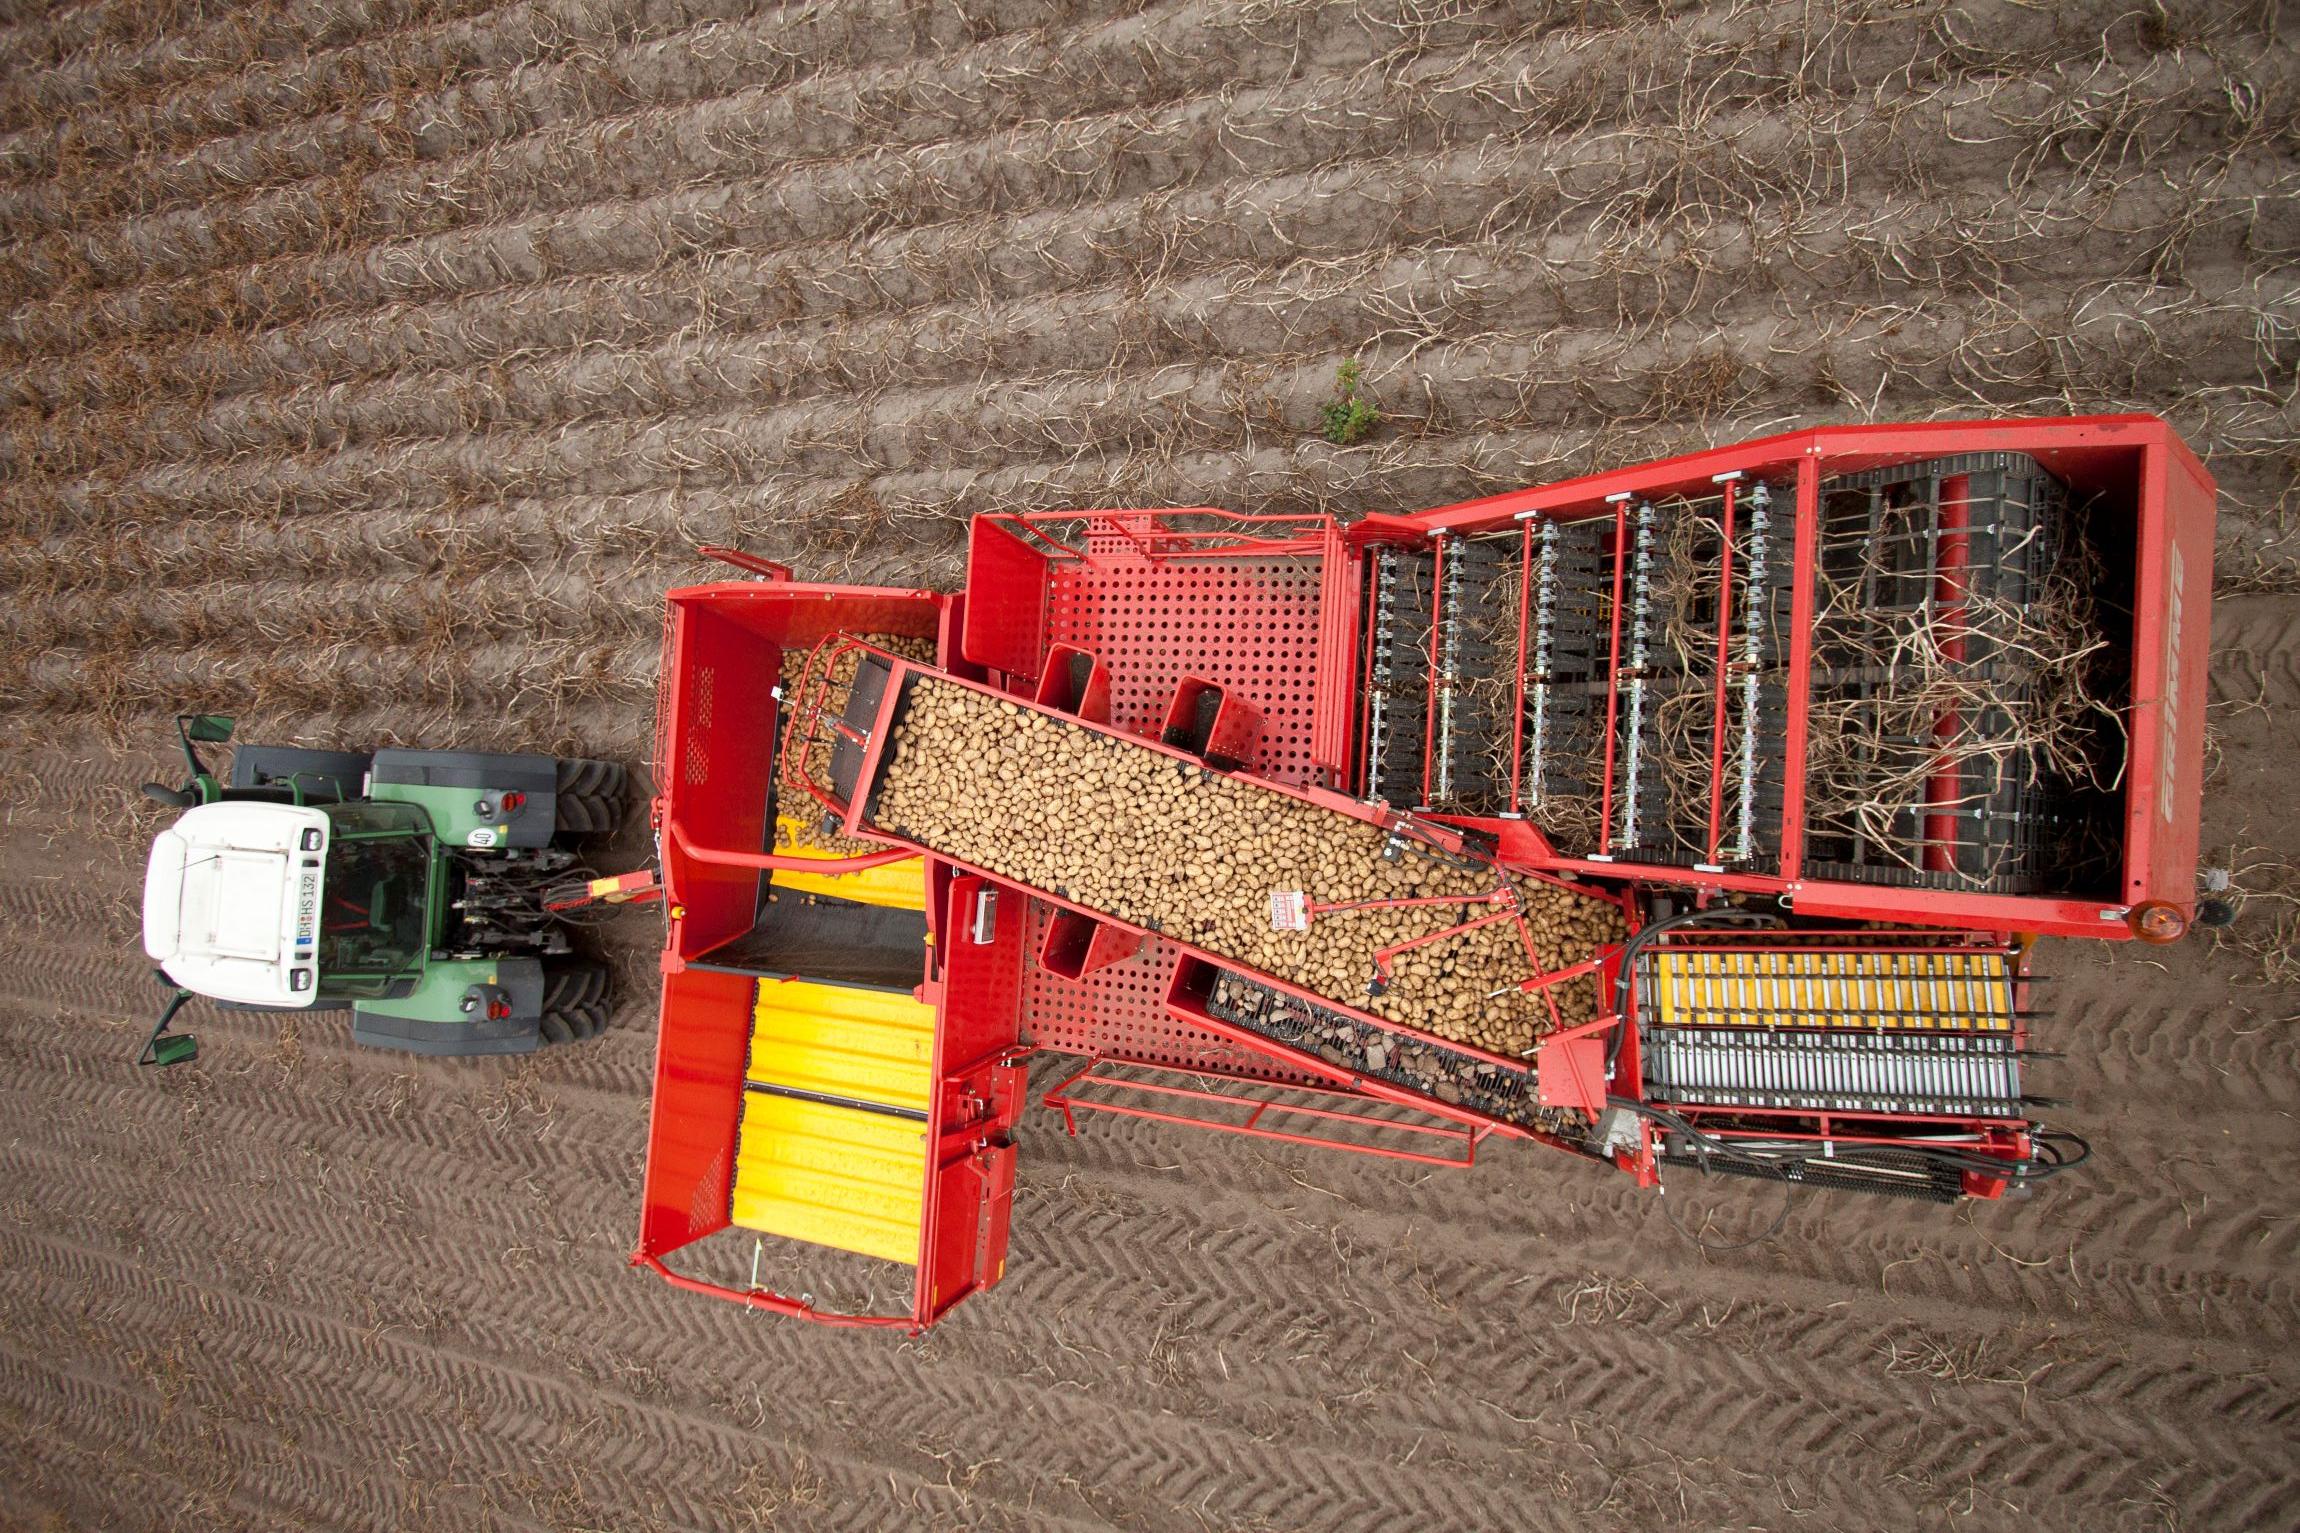 A fully automatic harvesting machine deposits the tubers in an accompanying vehicle or a bunker.